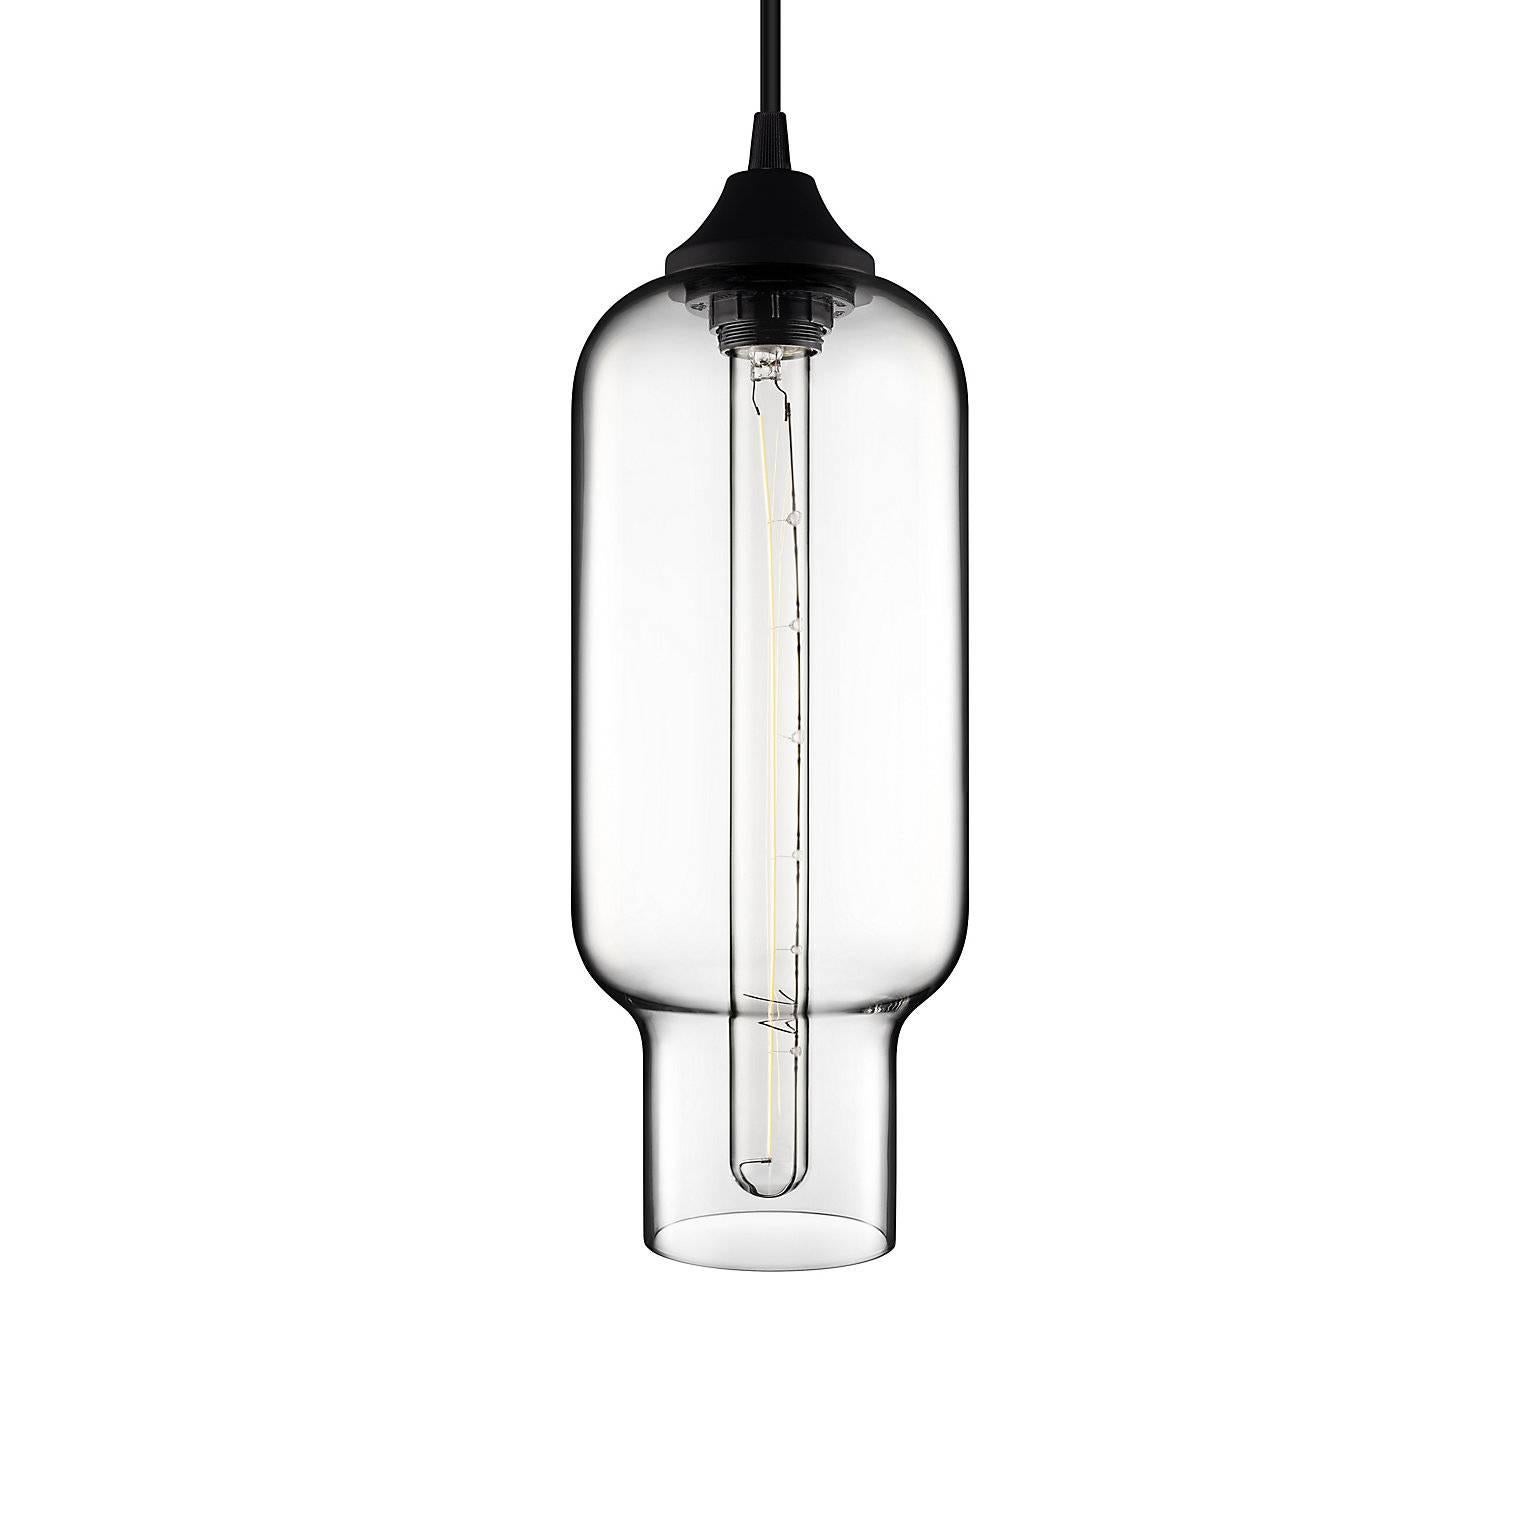 Pharos Sapphire Handblown Modern Glass Pendant Light, Made in the USA In New Condition For Sale In Beacon, NY